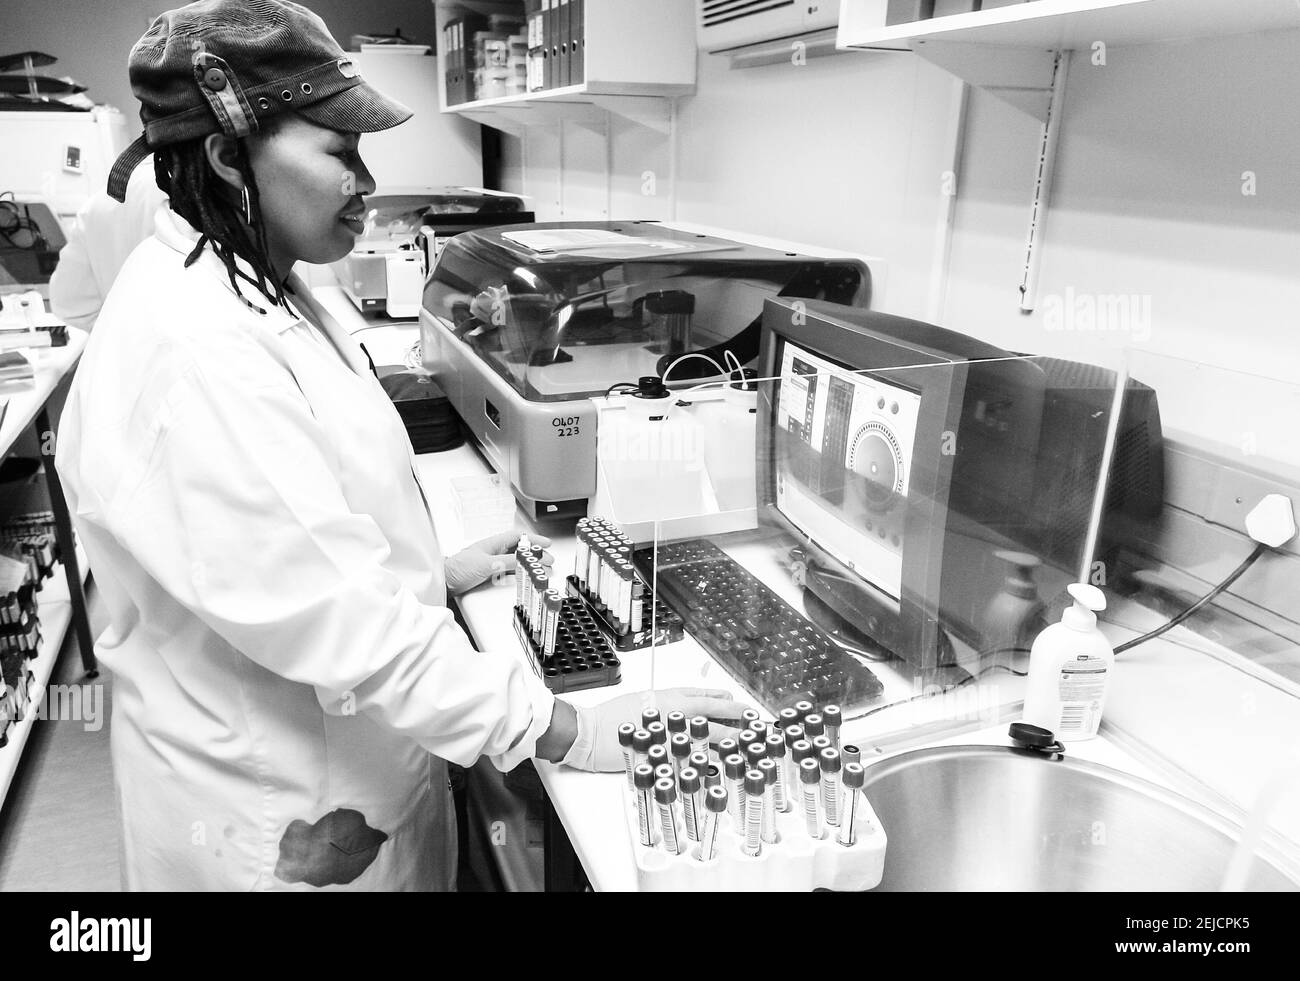 JOHANNESBURG, SOUTH AFRICA - Feb 20, 2021: Johannesburg, South Africa - December 12, 2010: Pathologist lab assistant testing blood in a clinical labor Stock Photo